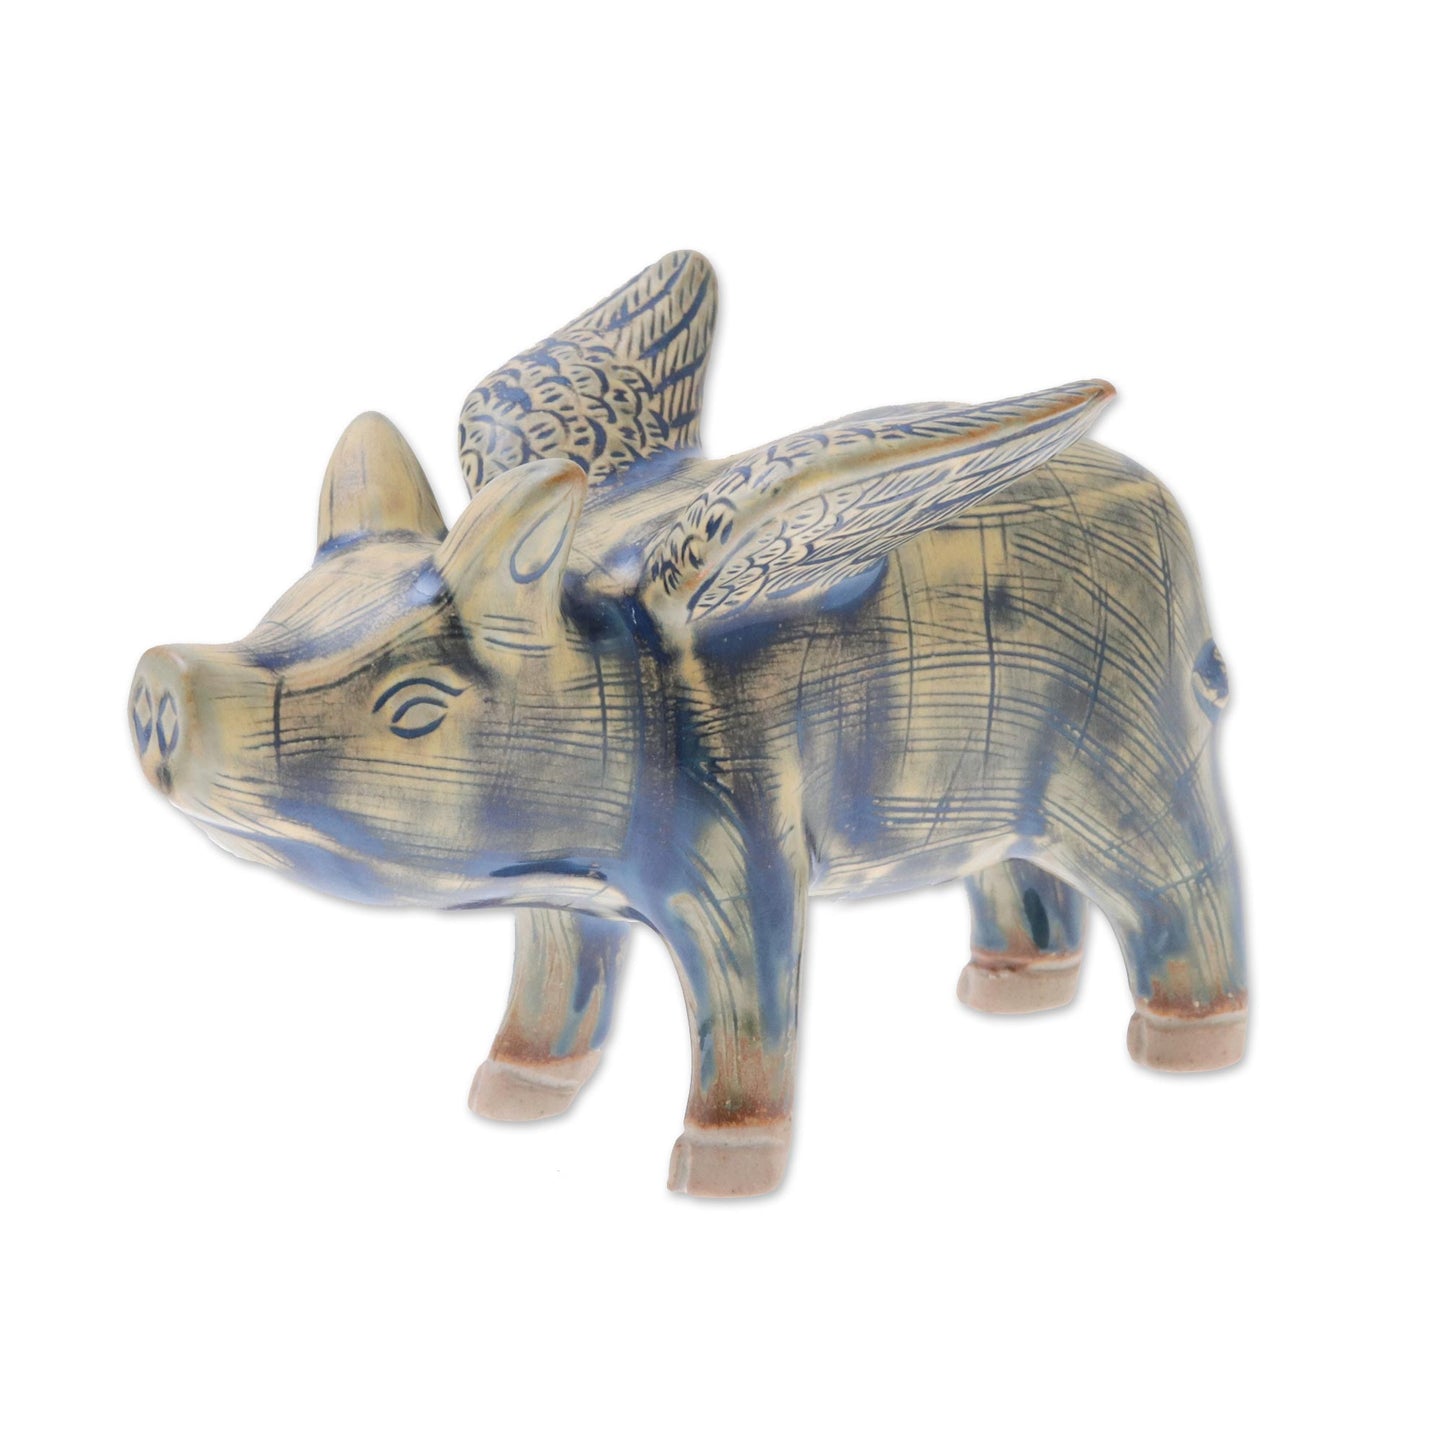 Flying Pig Ceramic Flying Pig in Mustard and Blue Shades